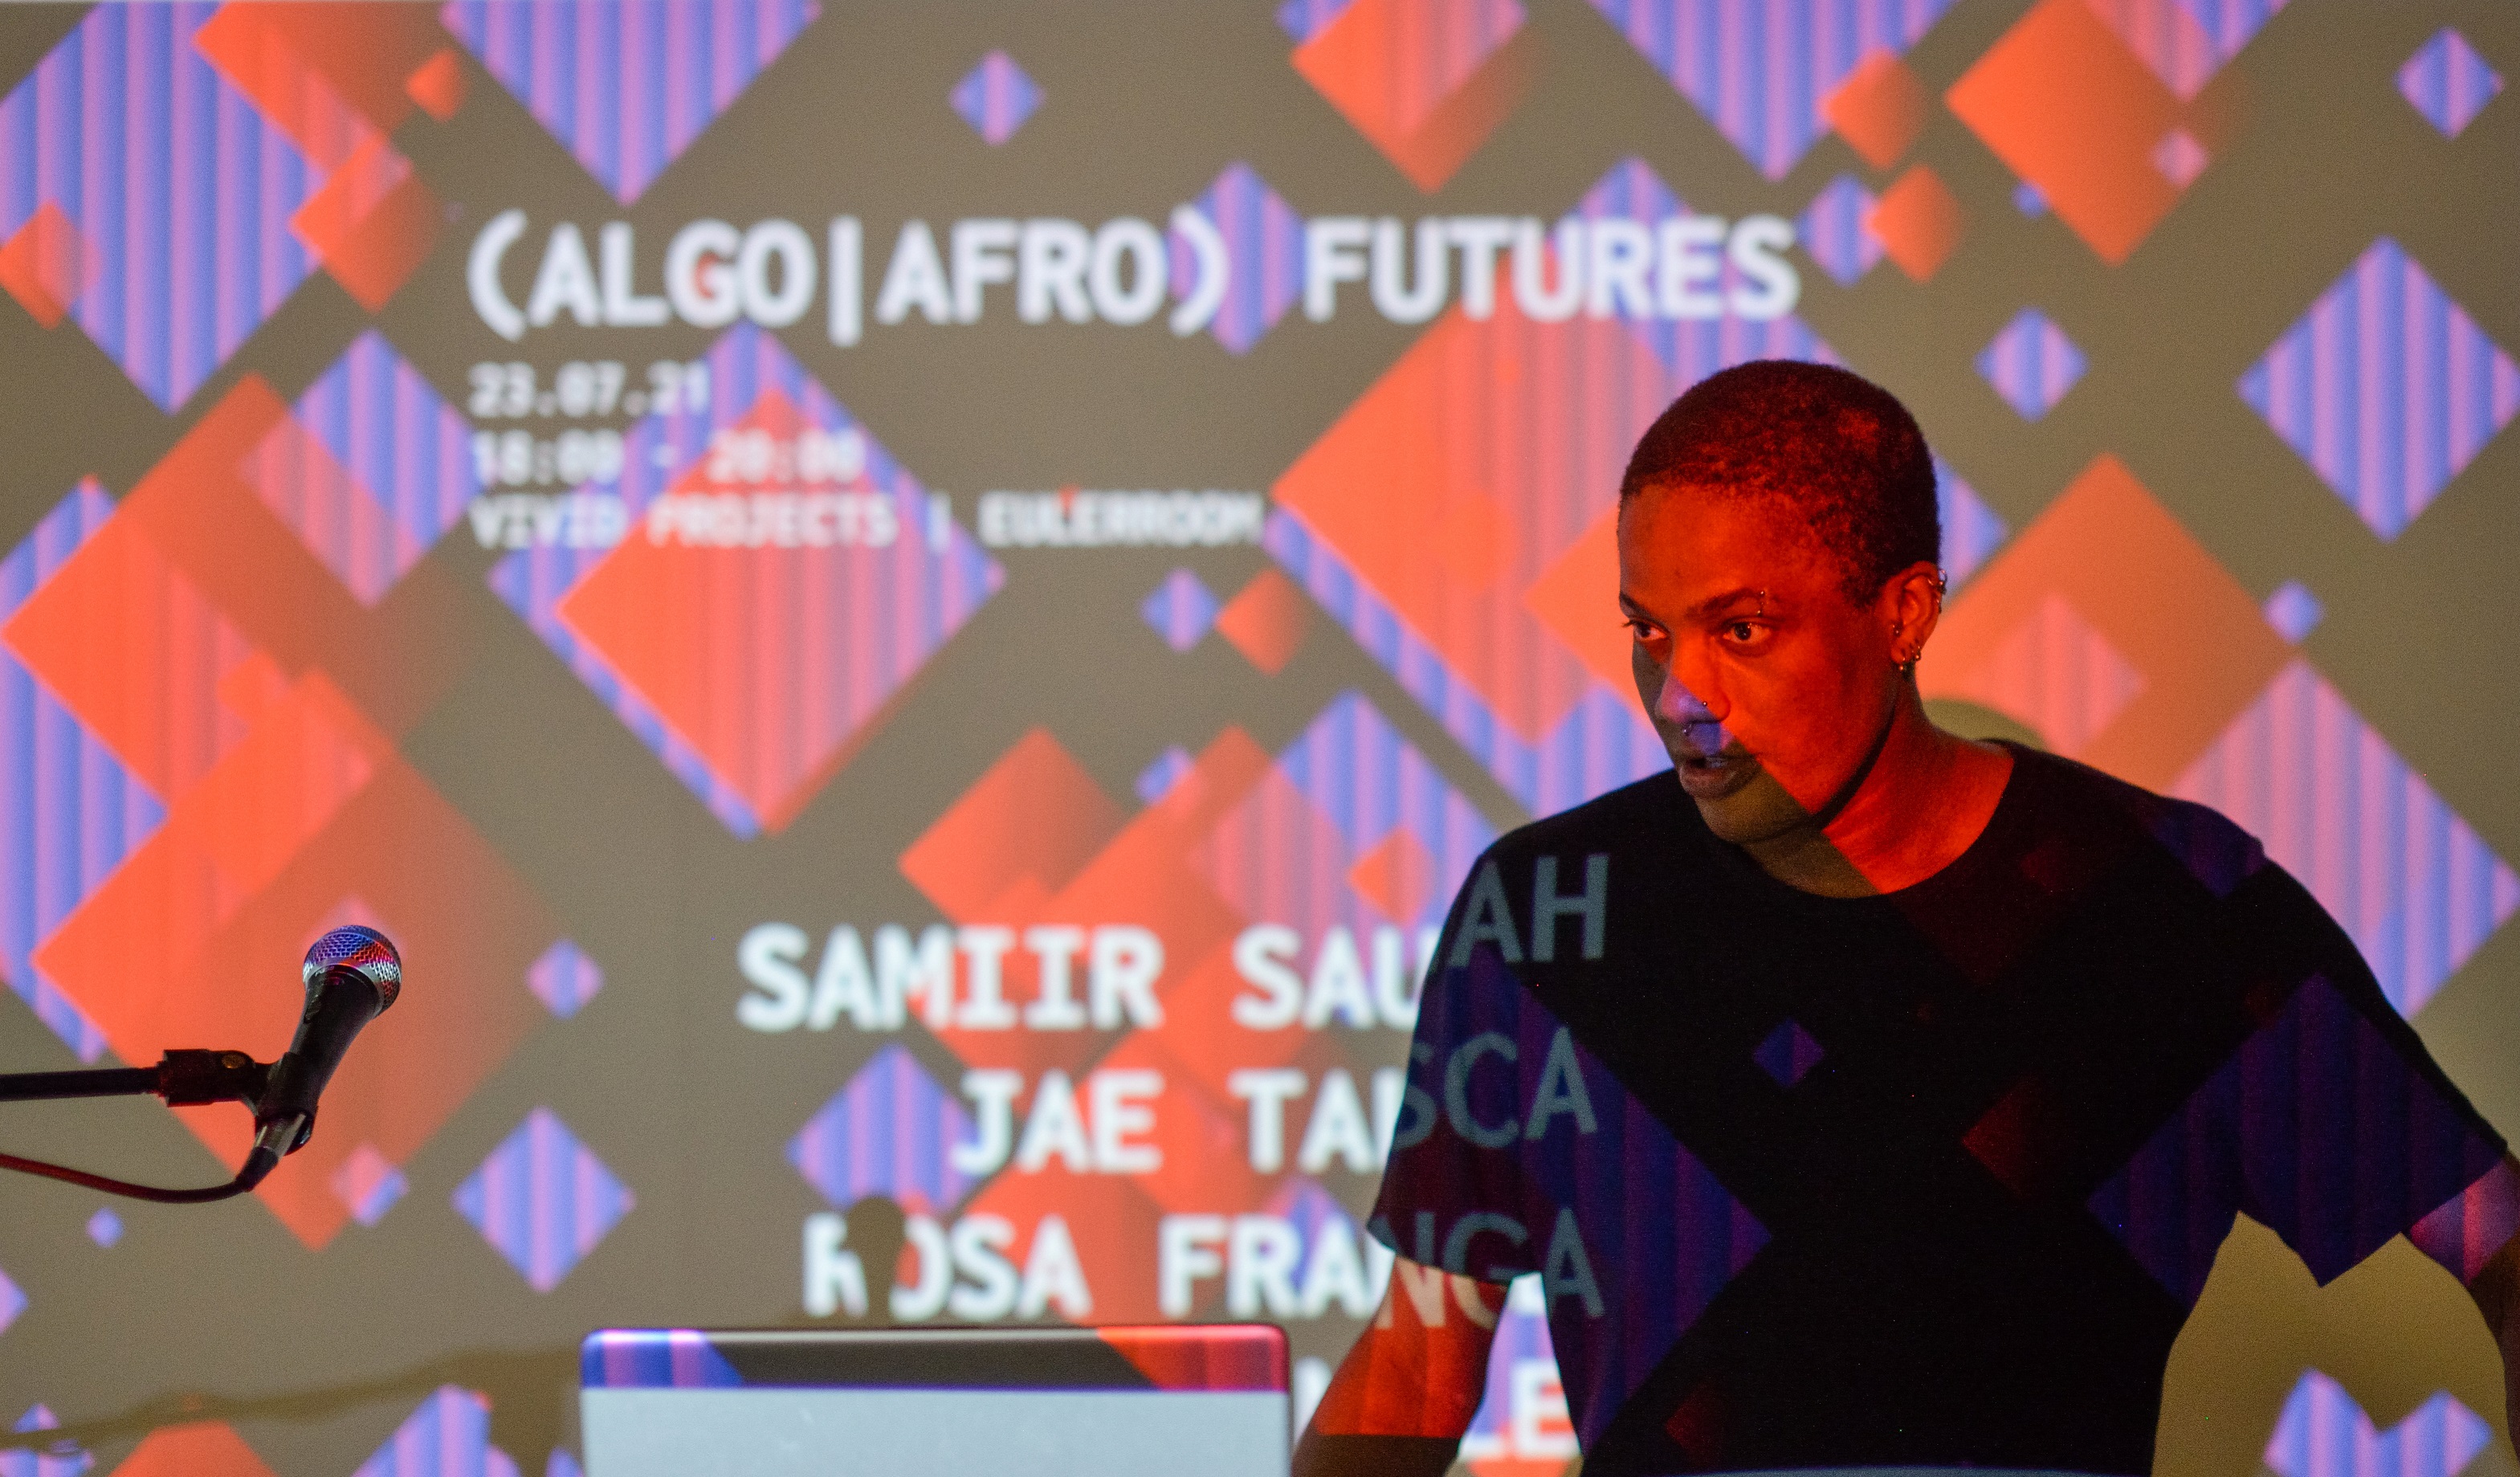 Antonio Roberts - (Algo | Afro) Futures event at Vivid Projects July 2021. Image by Marcin Sz.